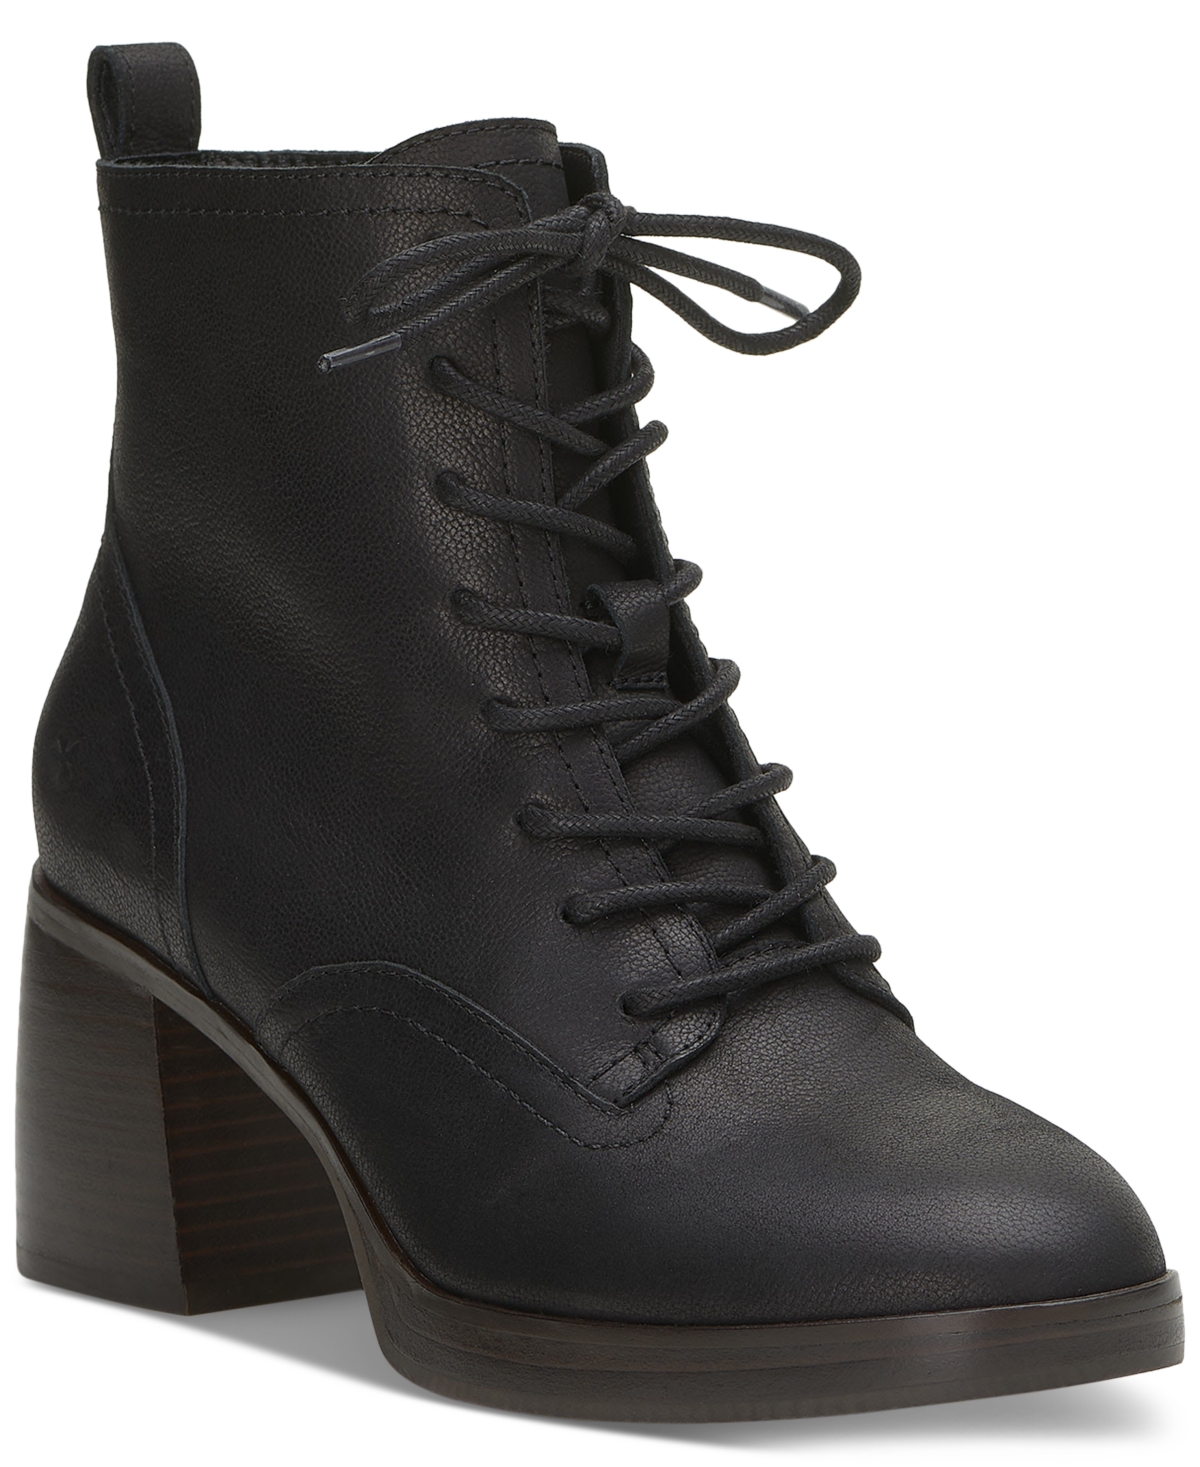 Women's Qiama Lace-Up Heeled Combat Booties - Black Leather